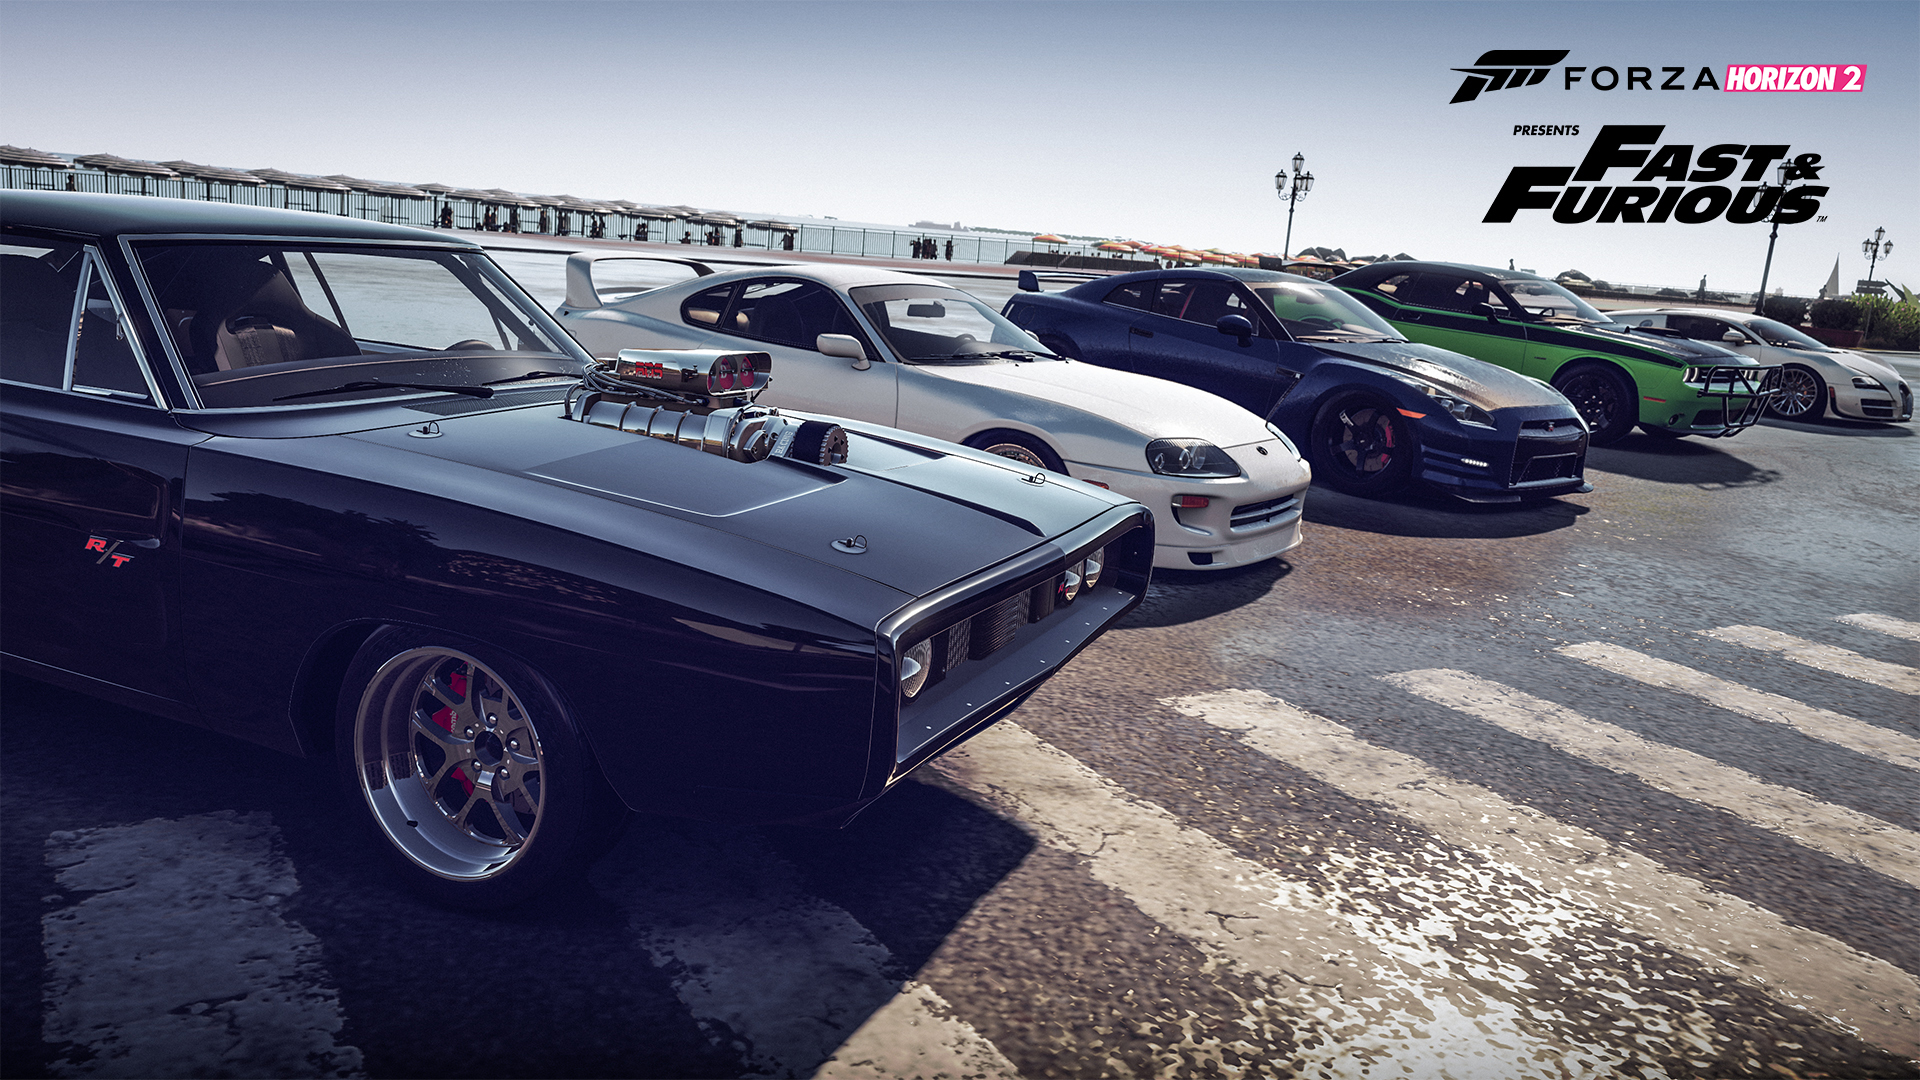 Forza 2 Presents Fast and Furious Photo Gallery